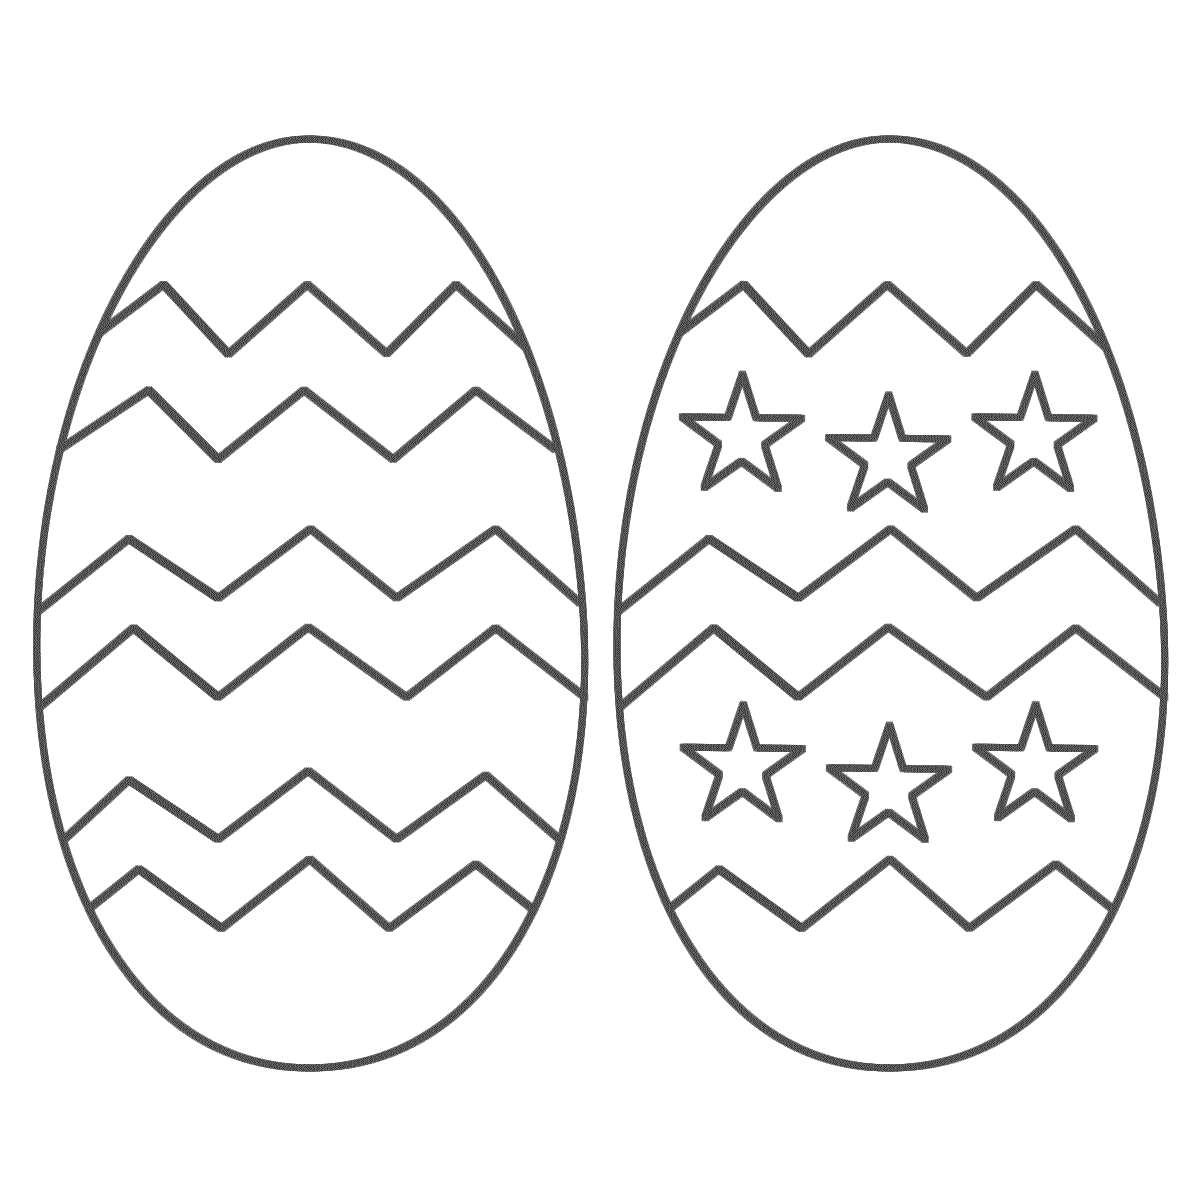 colouring picture easter egg 7 places for free printable easter egg coloring pages picture easter colouring egg 